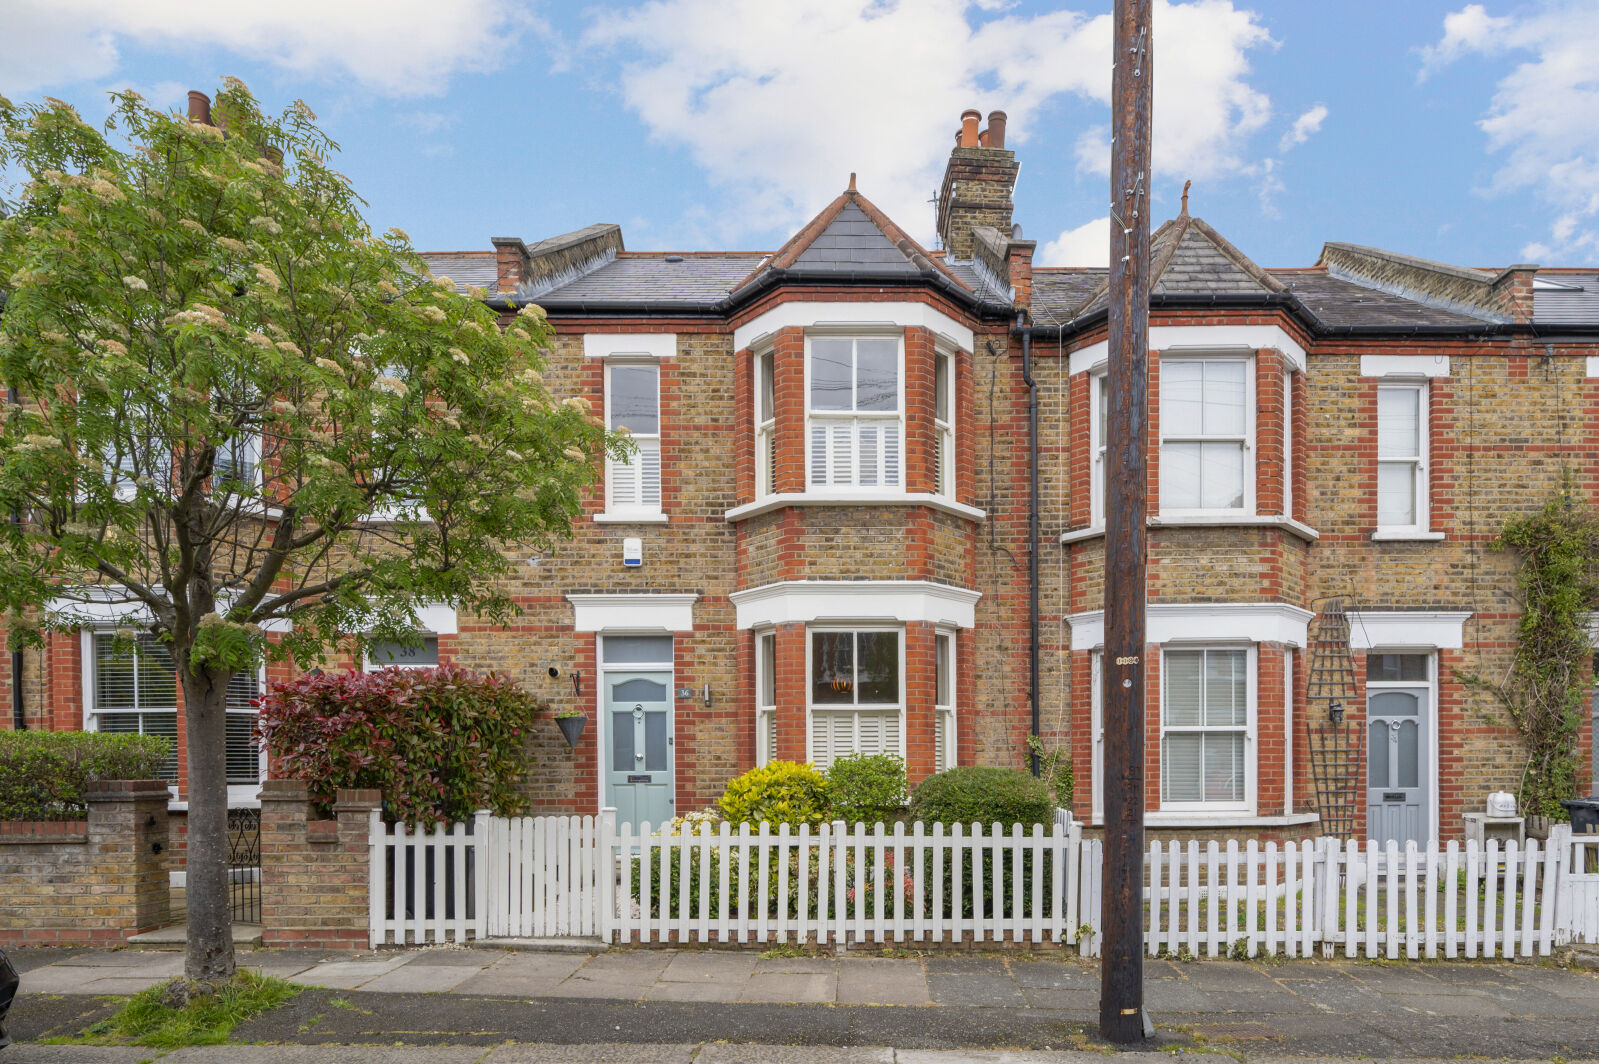 2 bedroom mid terraced house for sale Trewince Road, West Wimbledon, SW20, main image